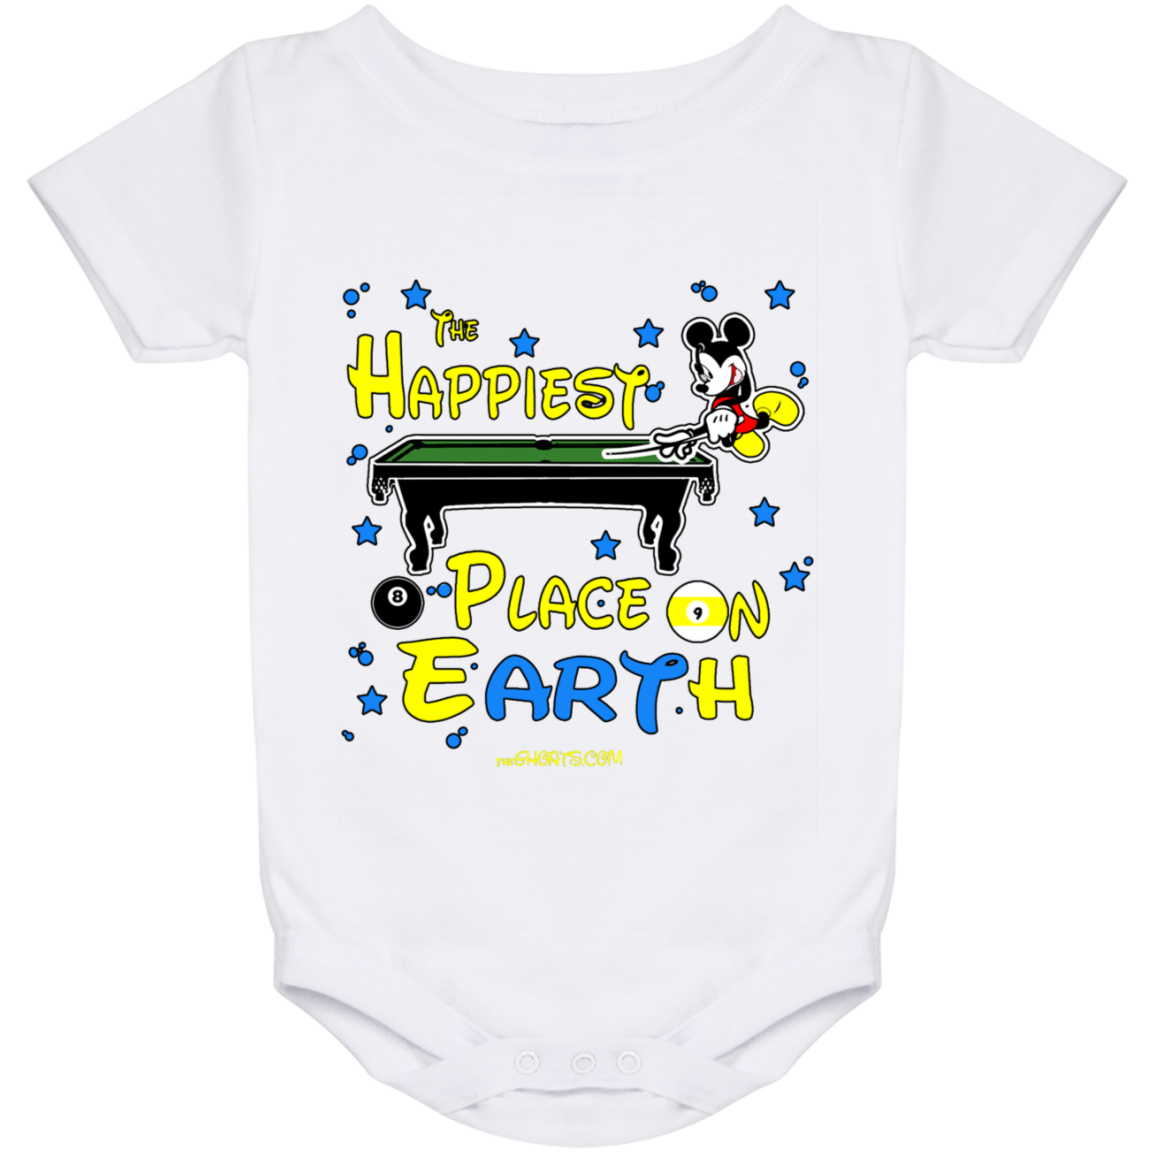 The GHOATS custom design #14. The Happiest Place On Earth. Fan Art. Baby Onesie 24 Month